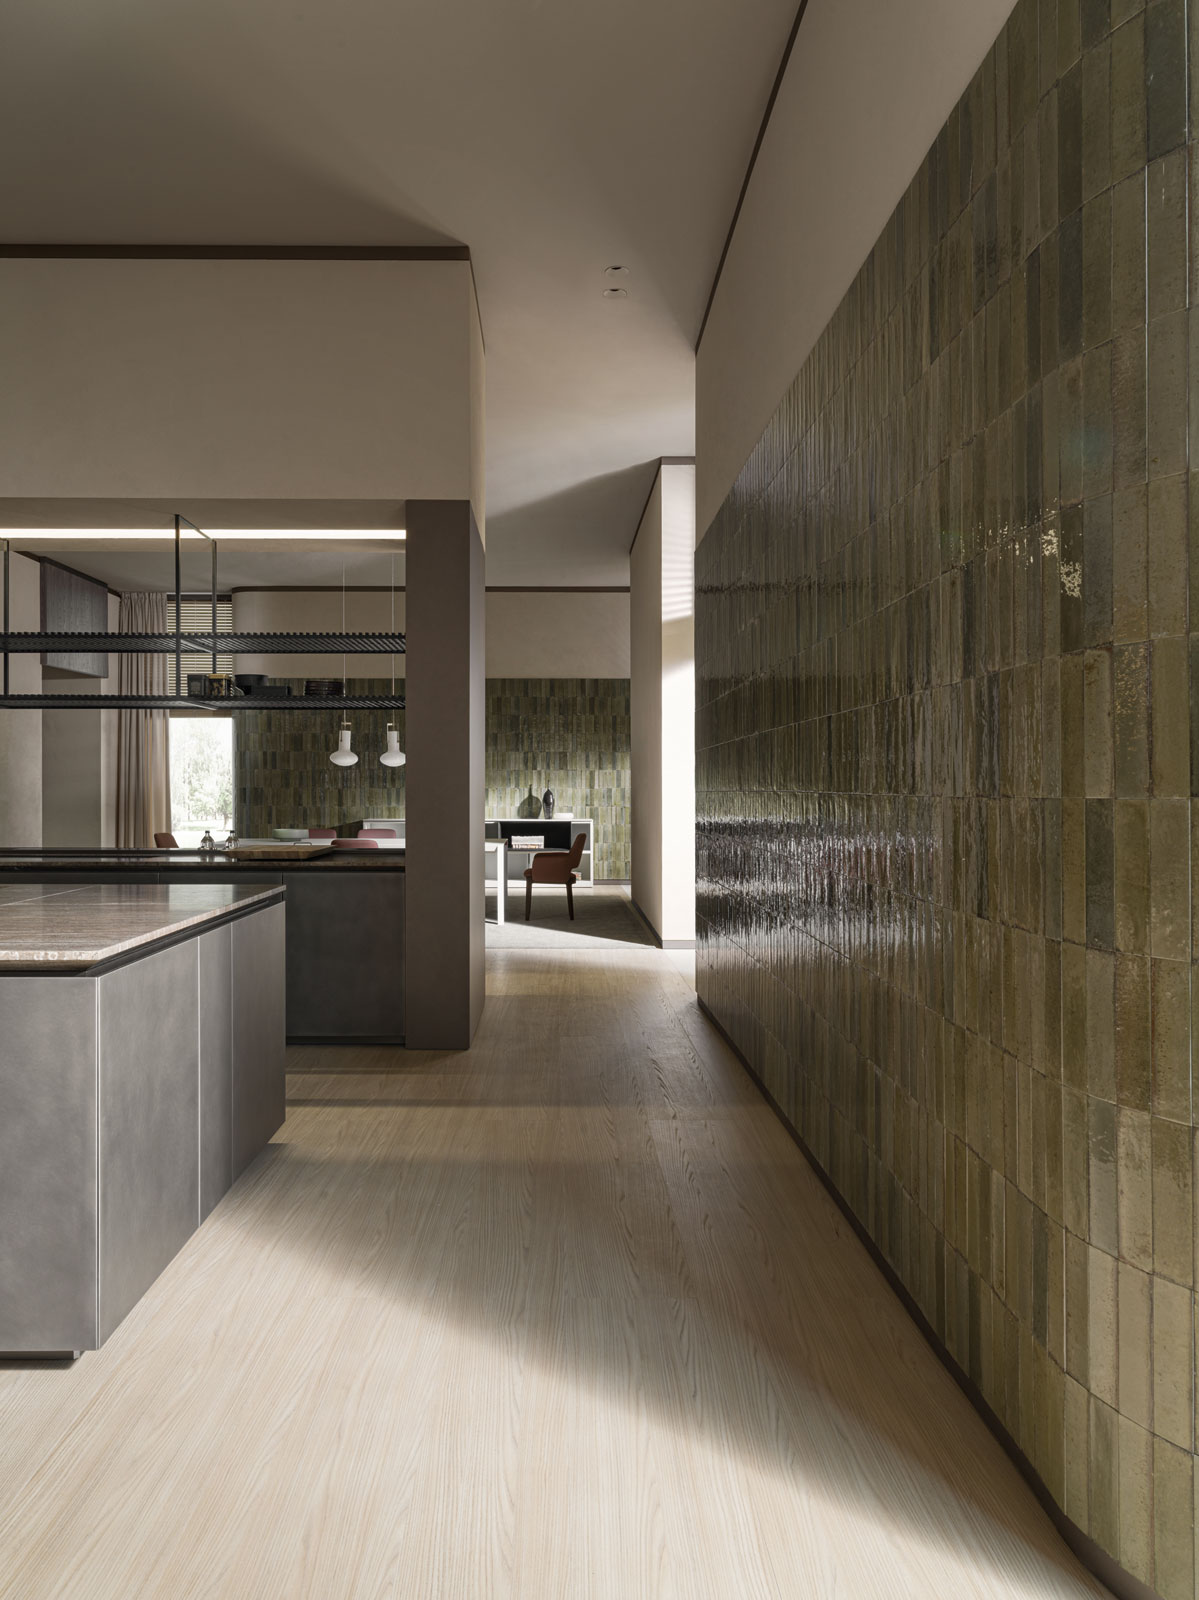 Intersection kitchen designed by Vincent Van Duysen -<br> The setting features Marazzi ceramic tiles